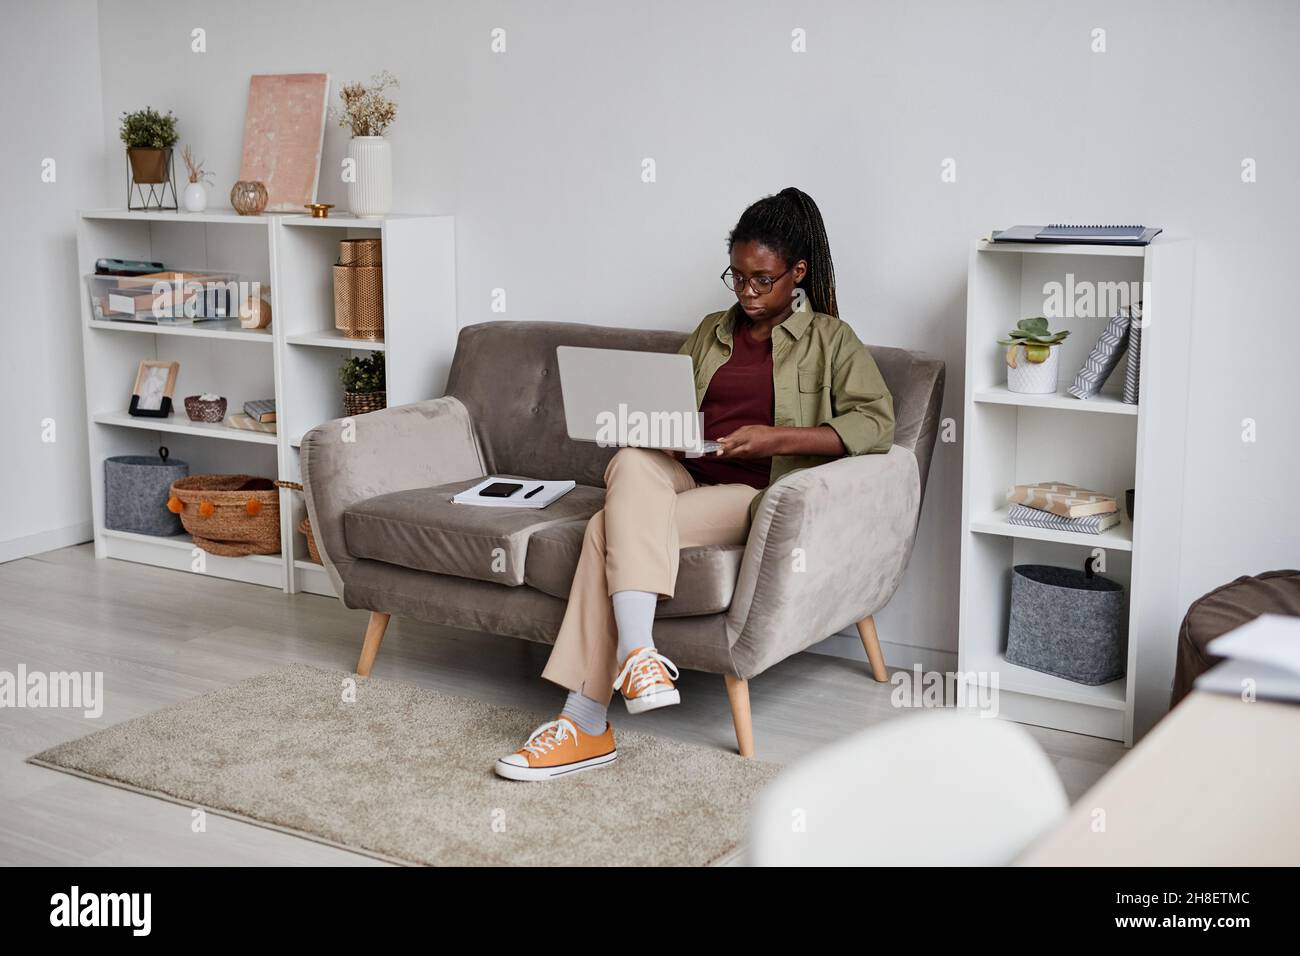 Full length portrait of young African-American woman working from home in comfortable setting, copy space Stock Photo